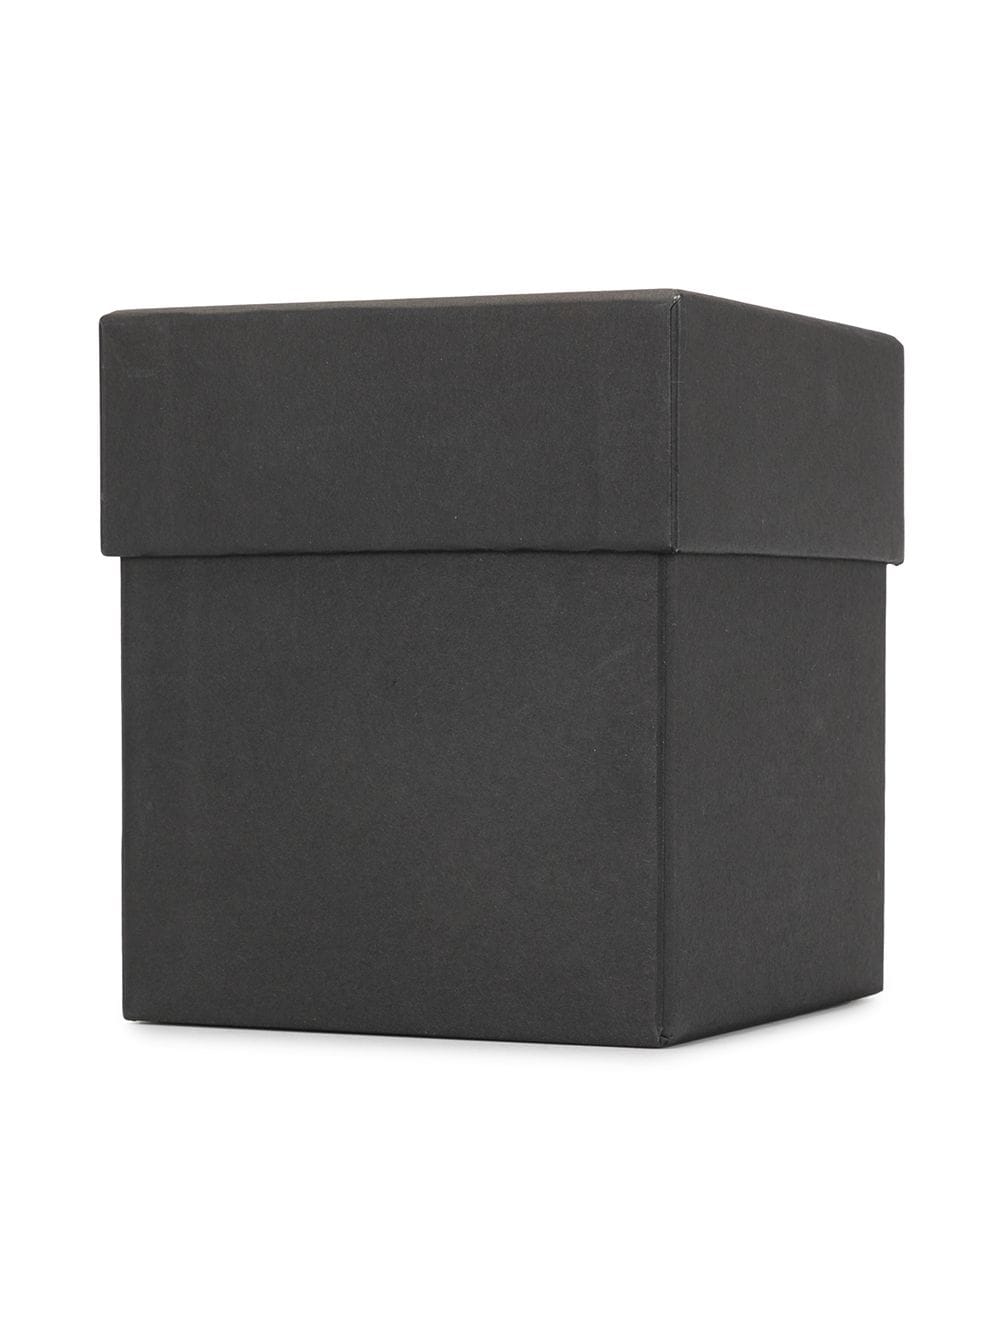 SCENTED CANDLE PETITS PAPIERS, BLACK WAX - $150.00